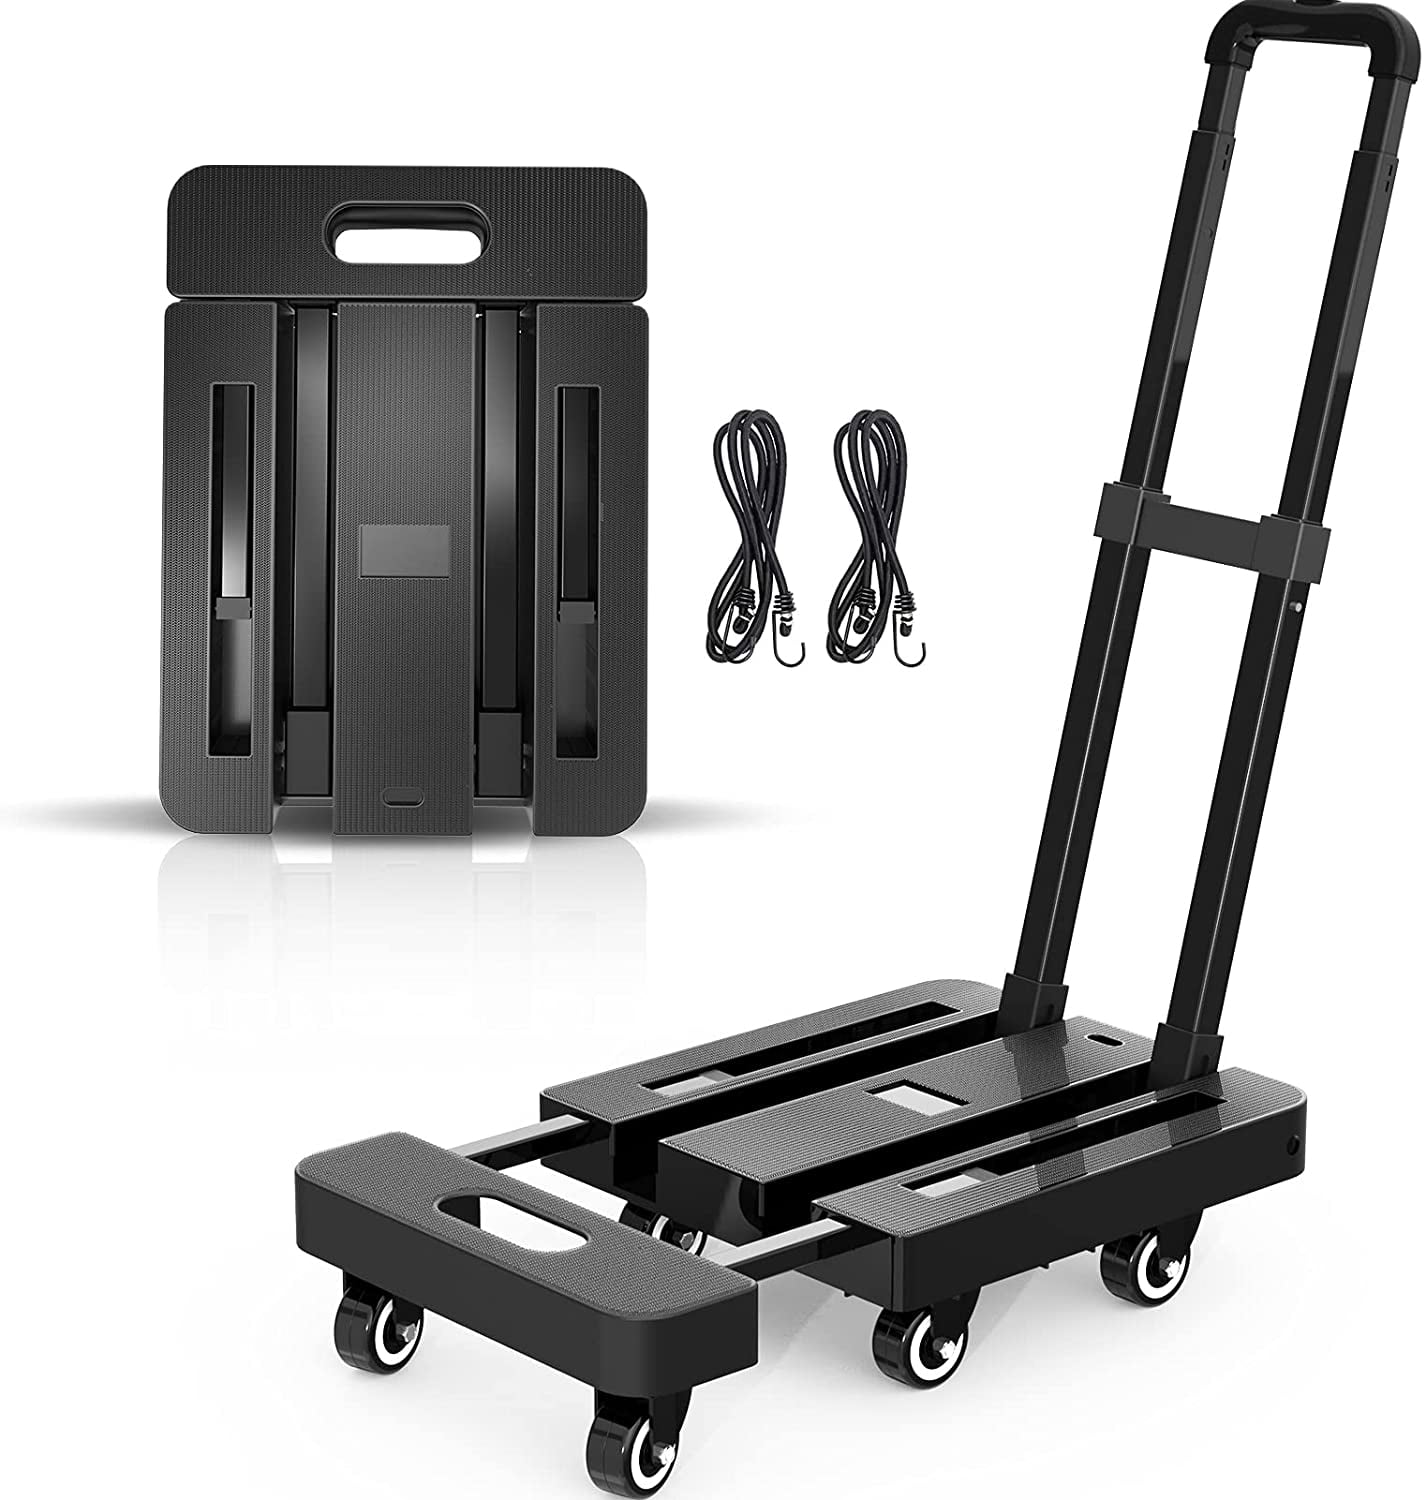 Wheel 360° Rotating Folding Hand Truck Portable Aluminum Rod Luggage Cart and Dolly for Luggage Travel Shopping and Home Office Use Moving MAYQMAY 4-Wheels Folding Hand Truck 198lbs/90KG Capacity